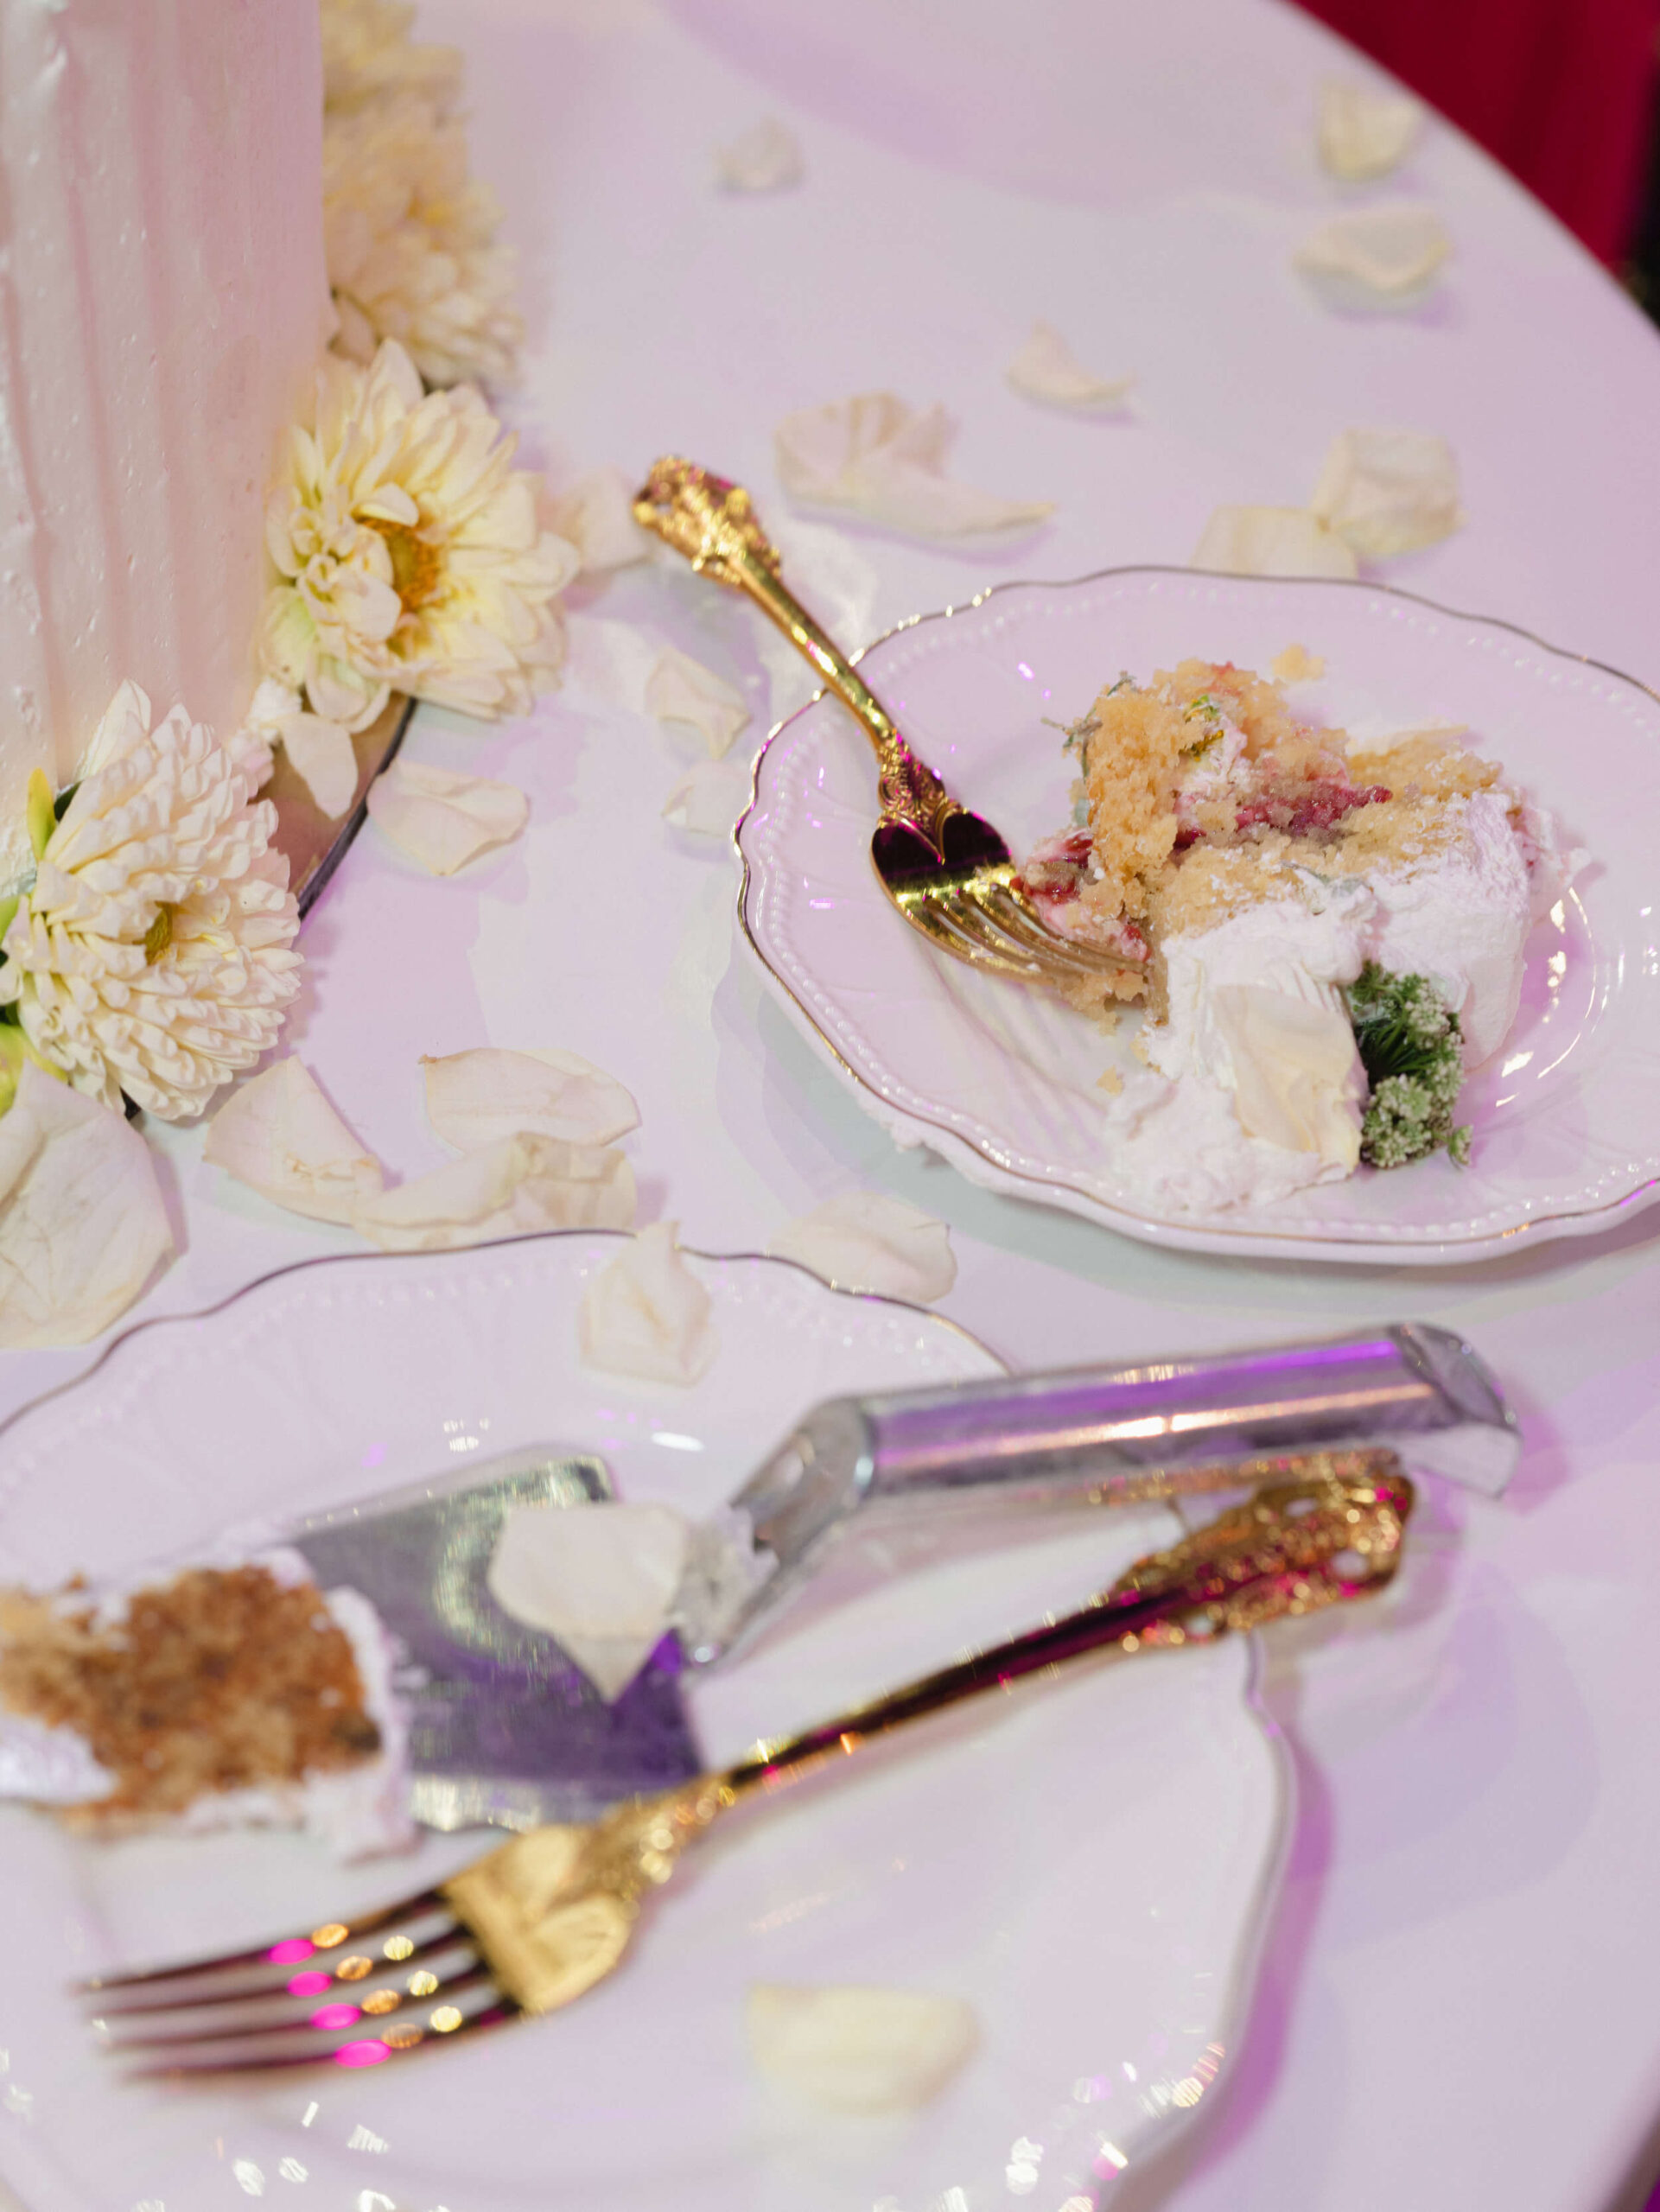 Plates, cutlery, and wedding cake